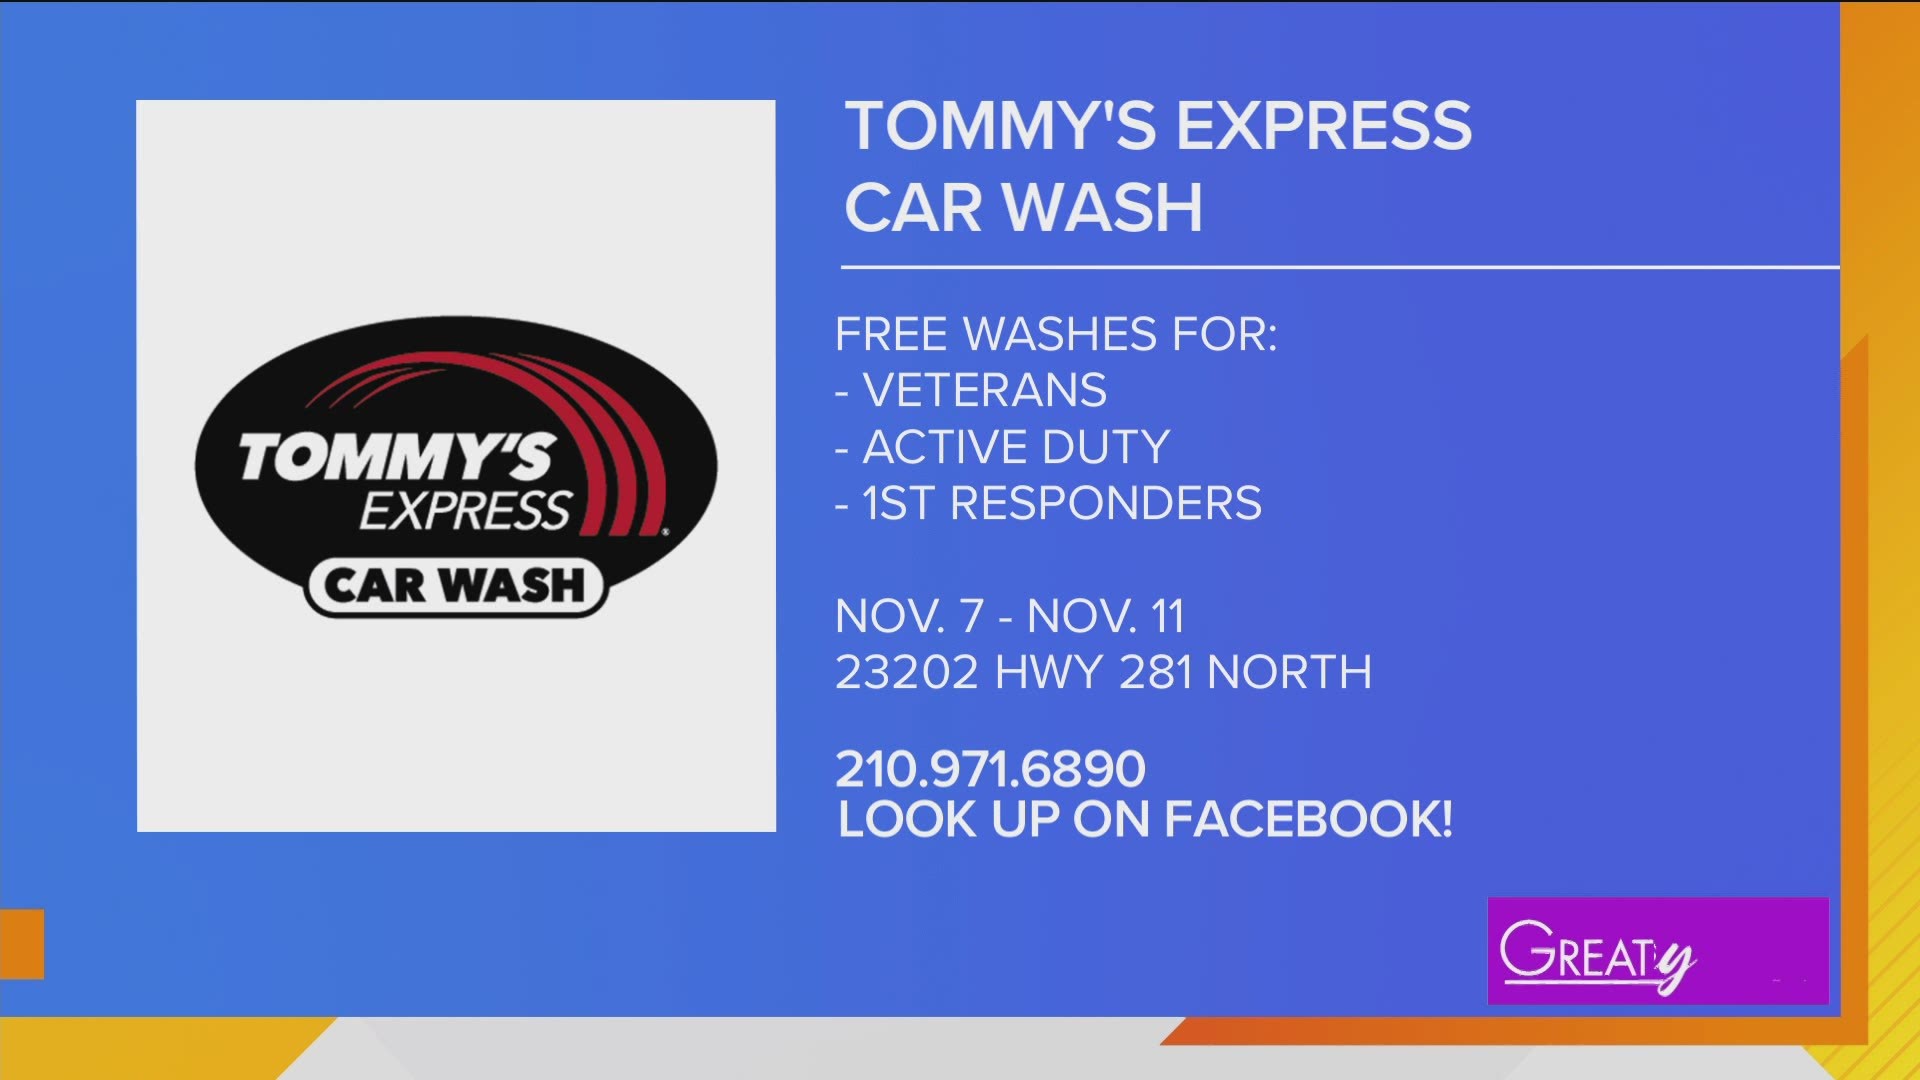 Tommy's Express Car Wash is giving away free car washes to veterans and first responder's in honor of Veteran's Day.